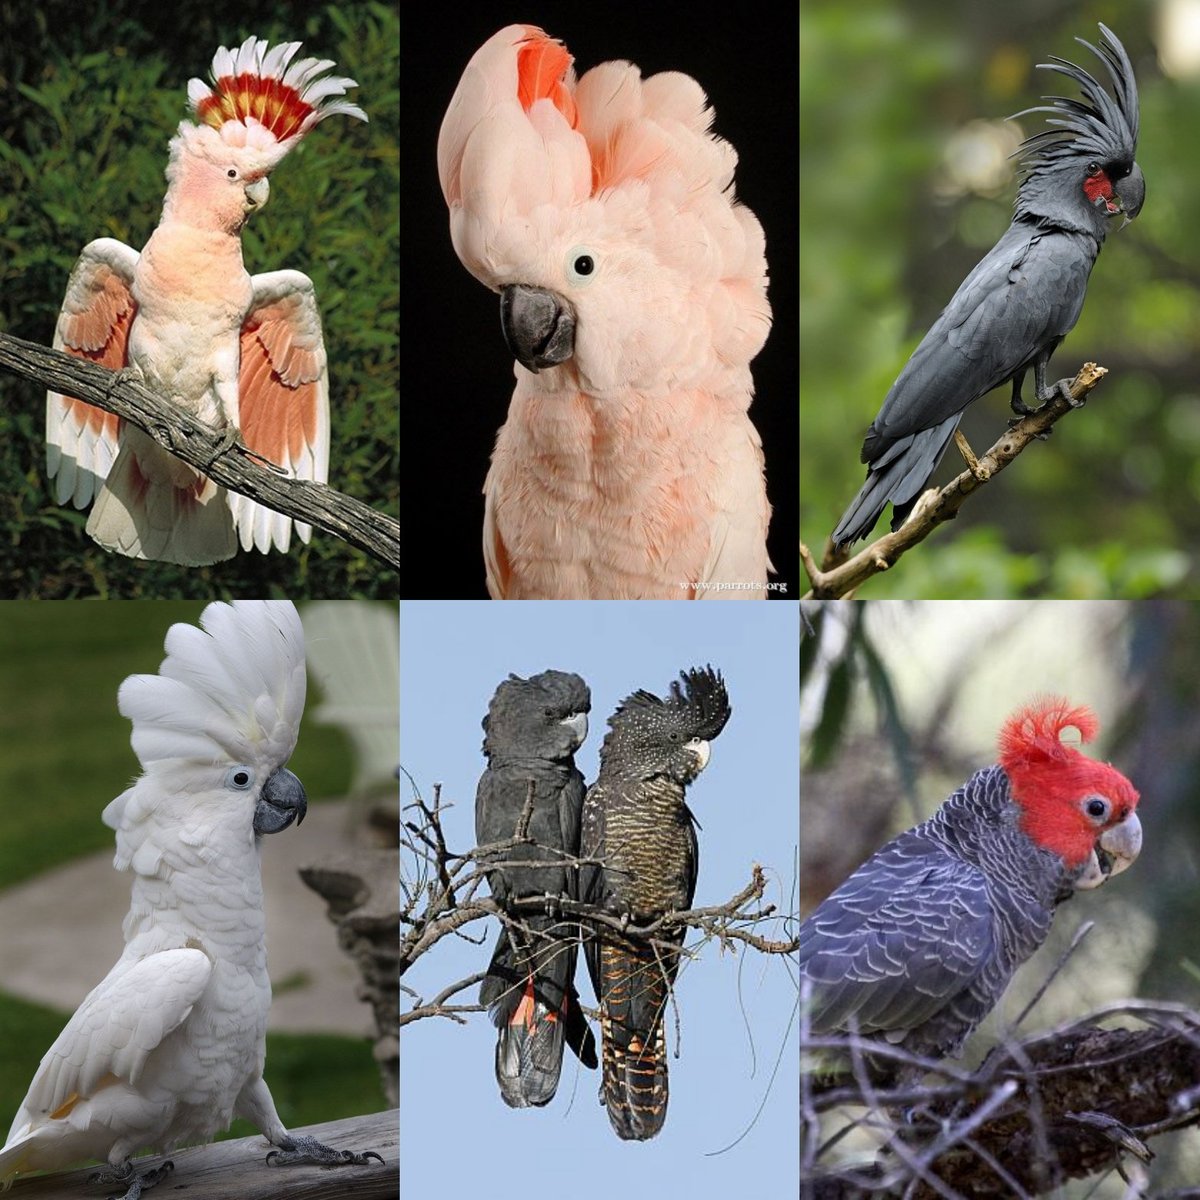 ACTUALLYCockatiel is like an Eevee. It can evolve into one of these forms